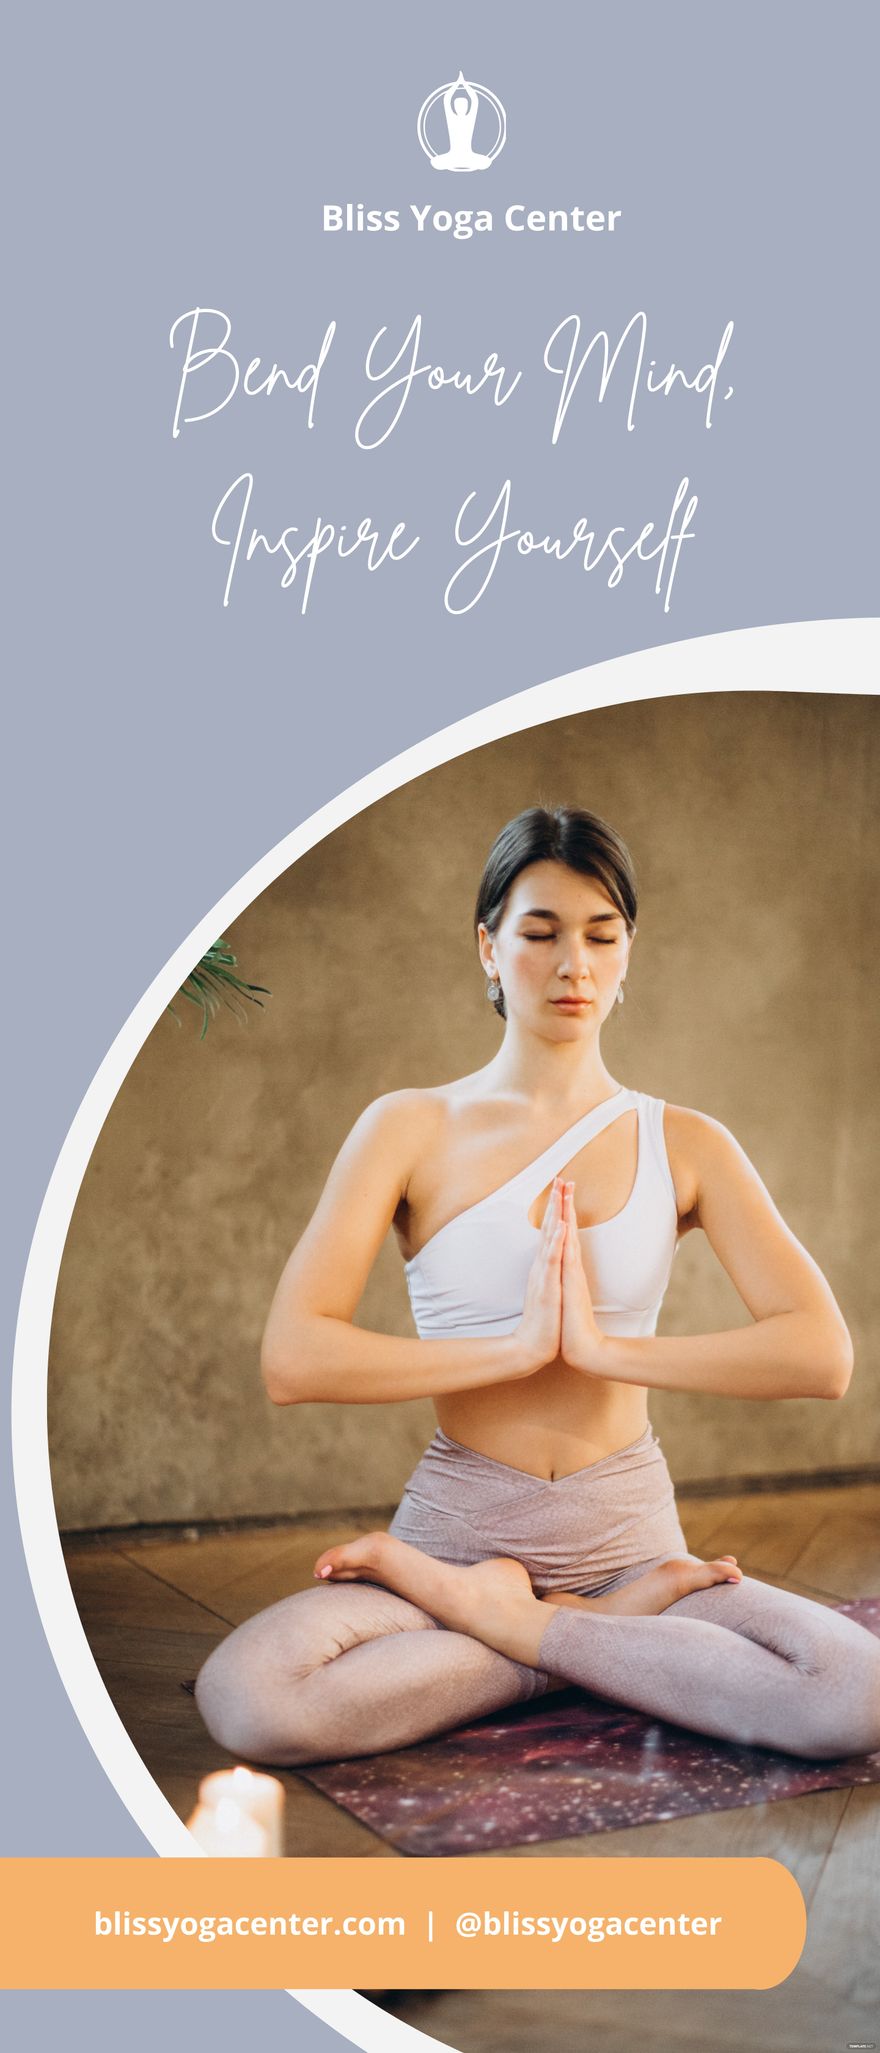 Yoga Center Roll-Up Banner Template